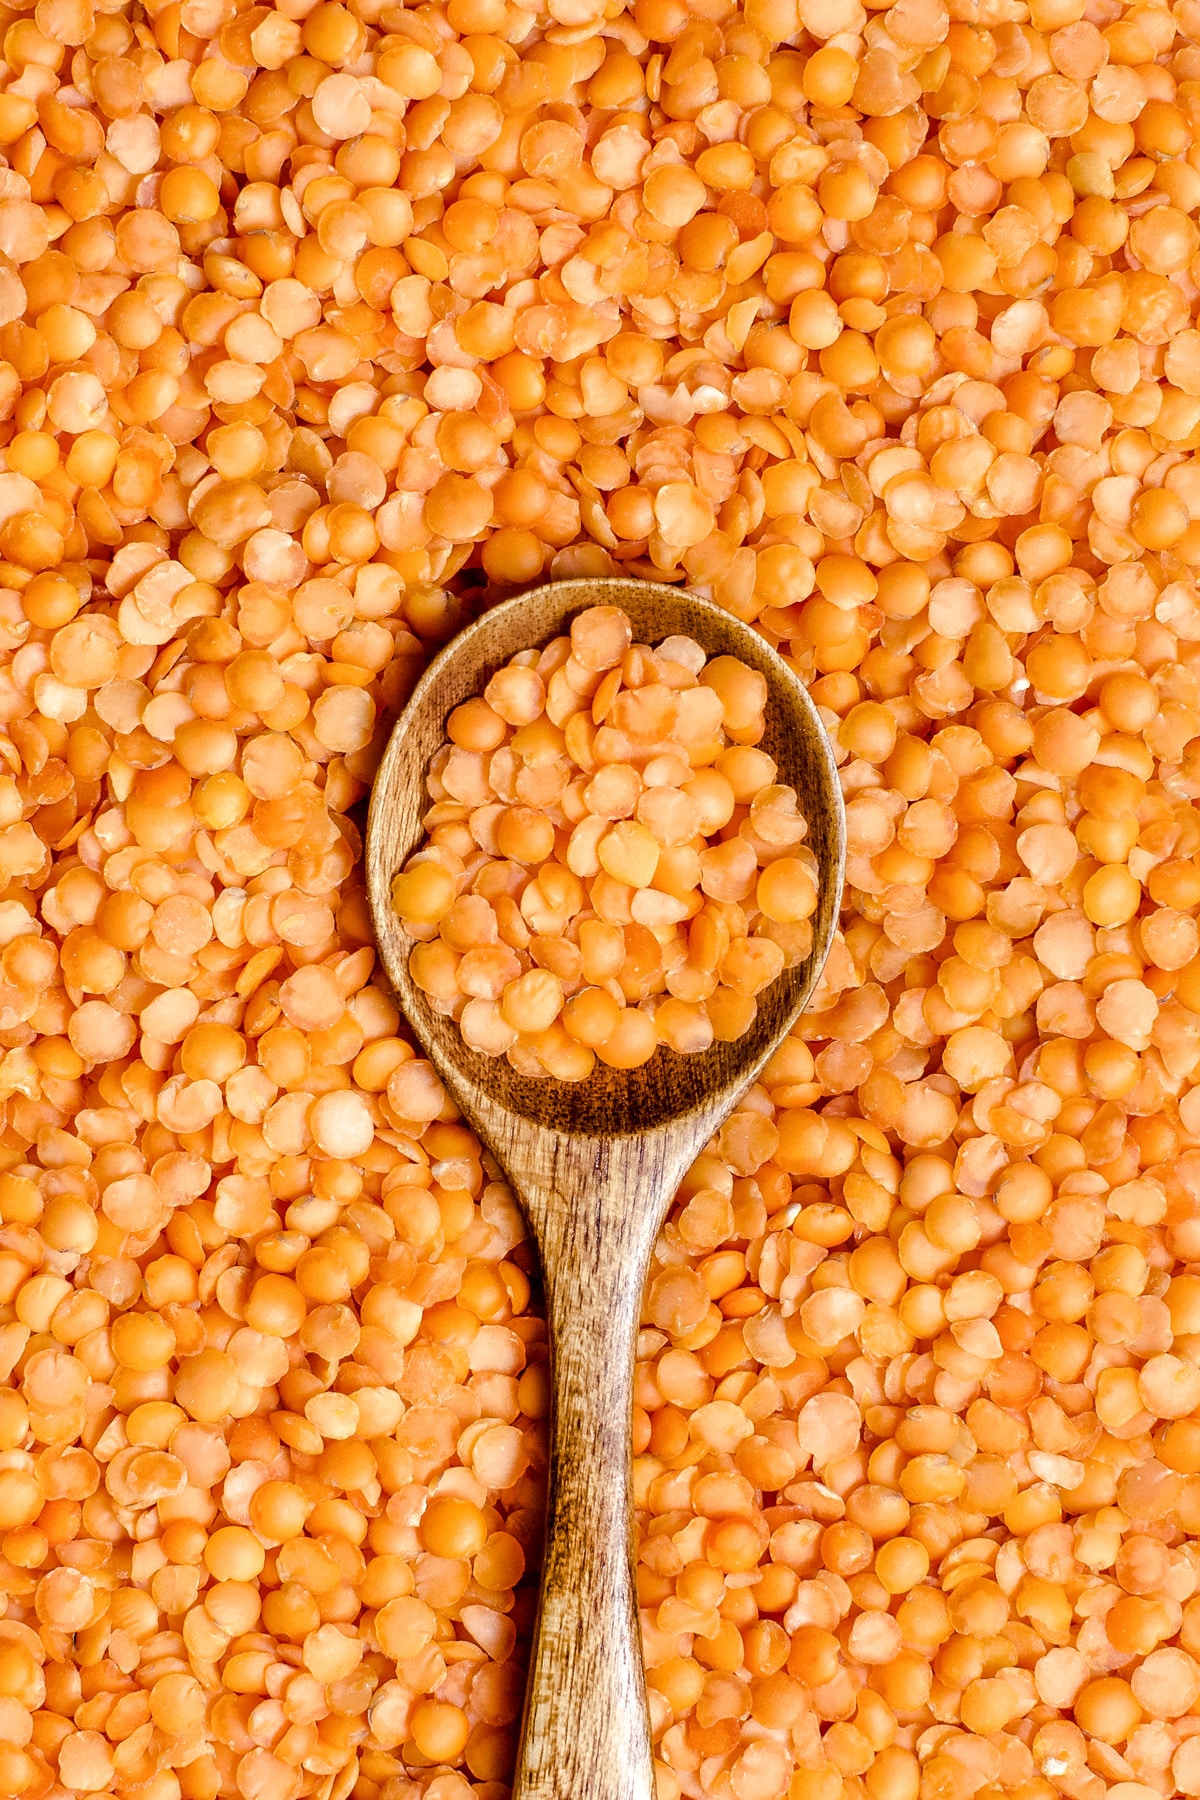 Red lentils with a spoon close up top view